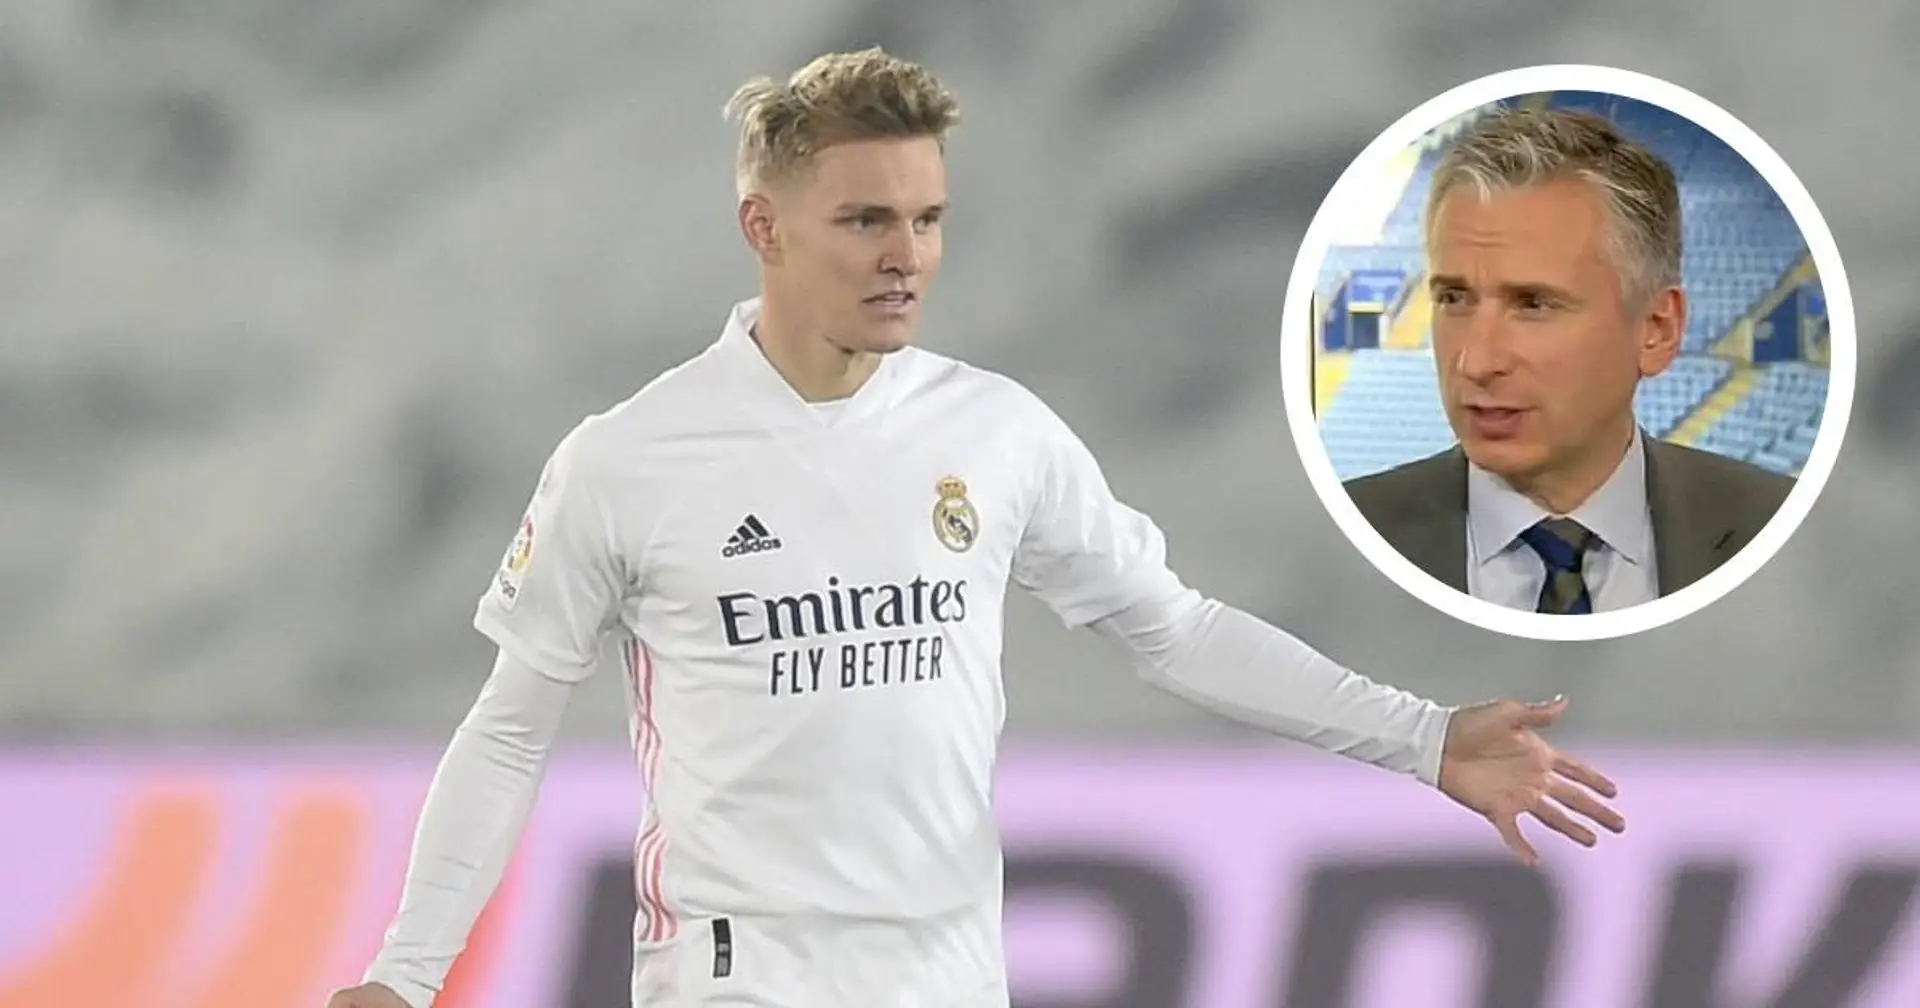 'Last thing Arsenal want is to get somebody who can't offer anything': ex-Gunner Alan Smith warns against Odegaard transfer